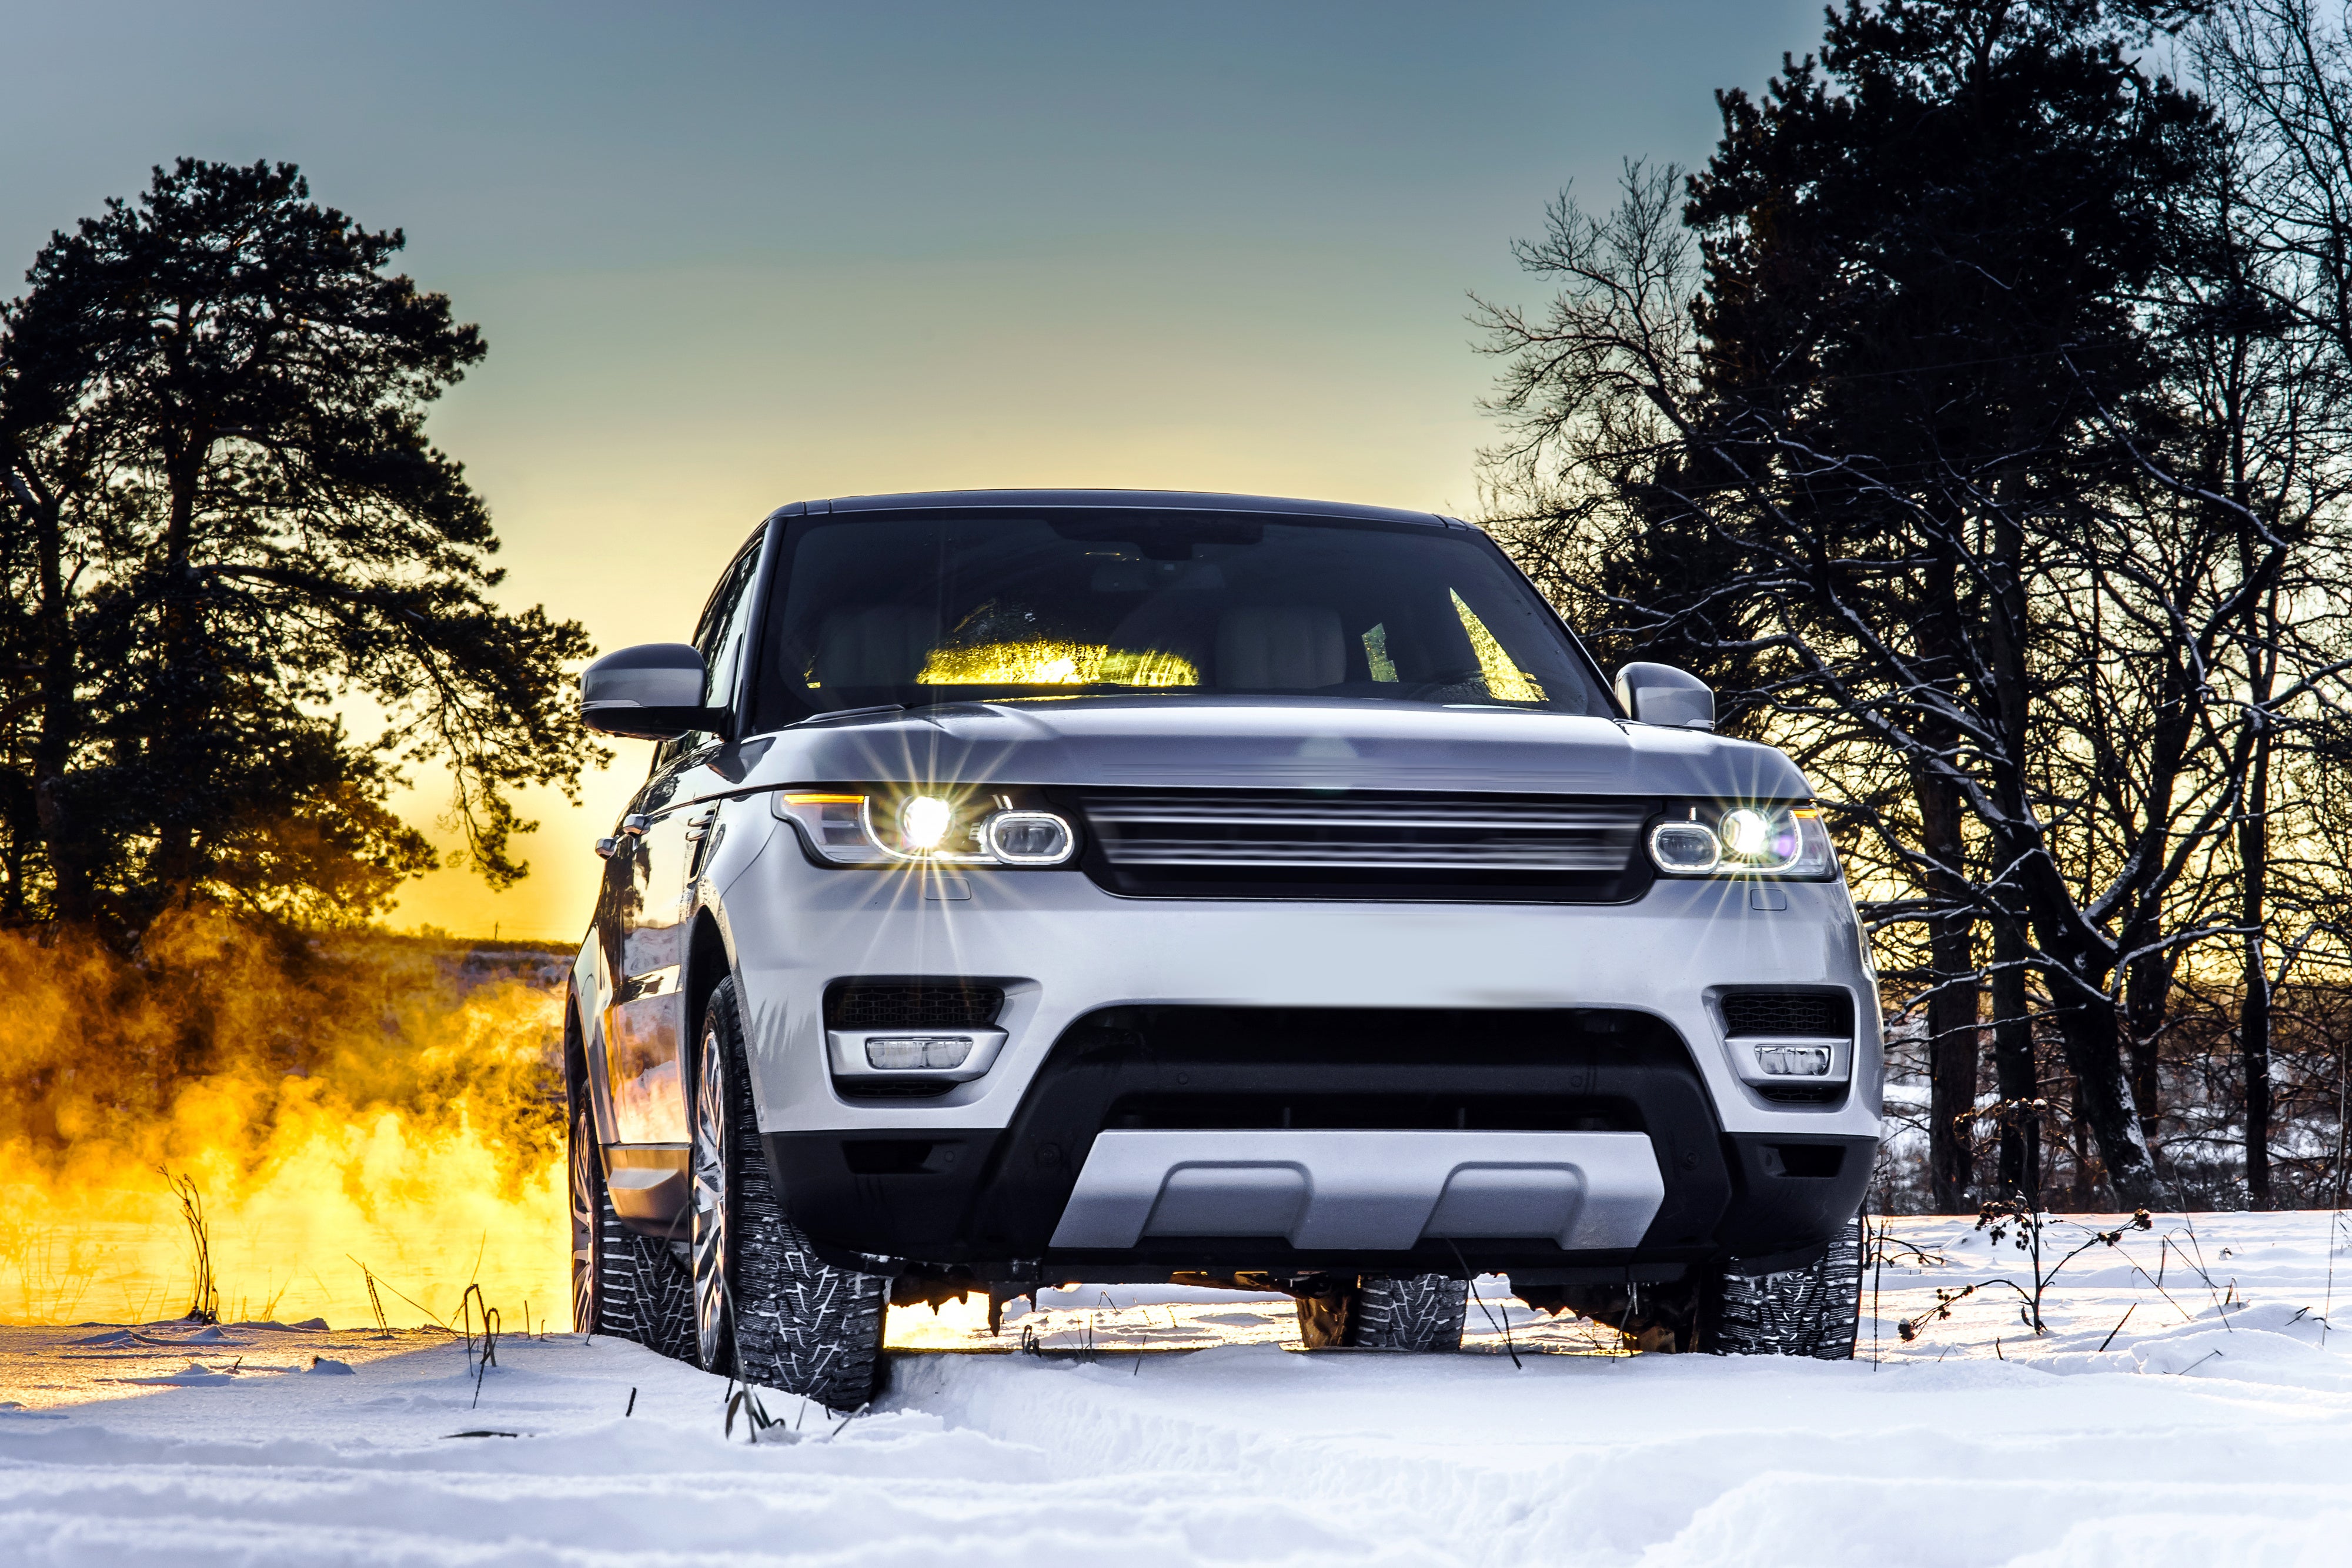 Mister Car Wash Shares How to Best Care for Your Car in the Winter